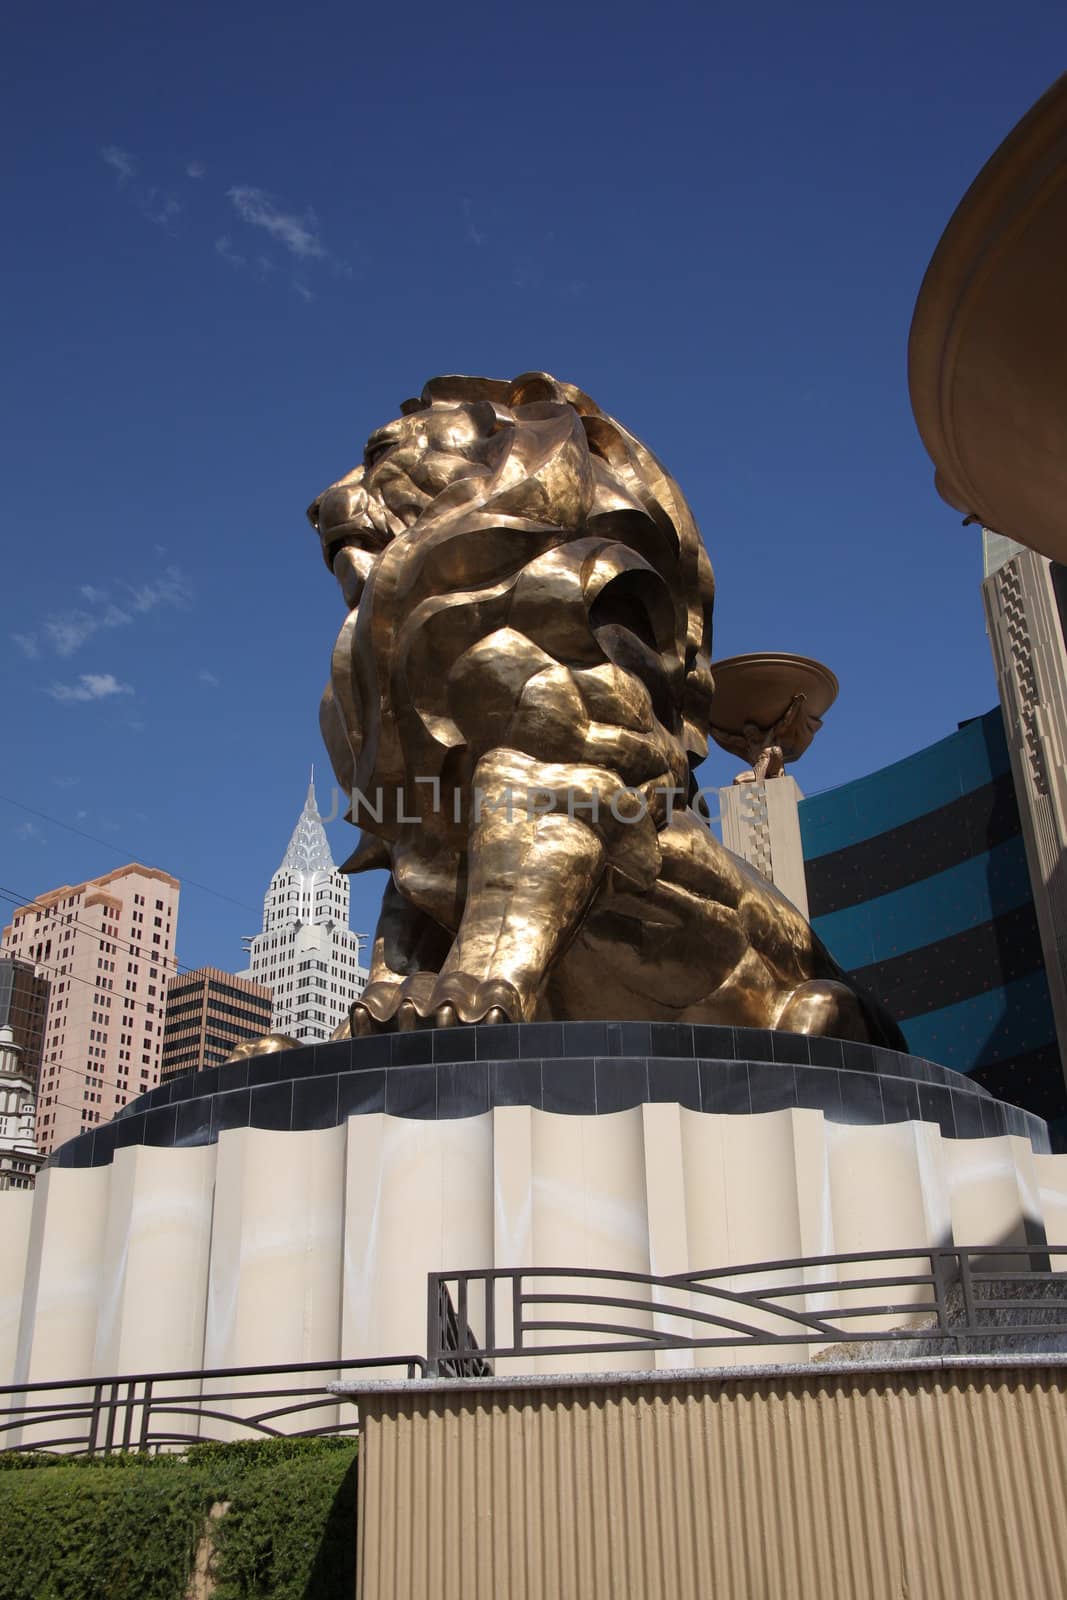 Las Vegas - MGM Grand Lion by Ffooter